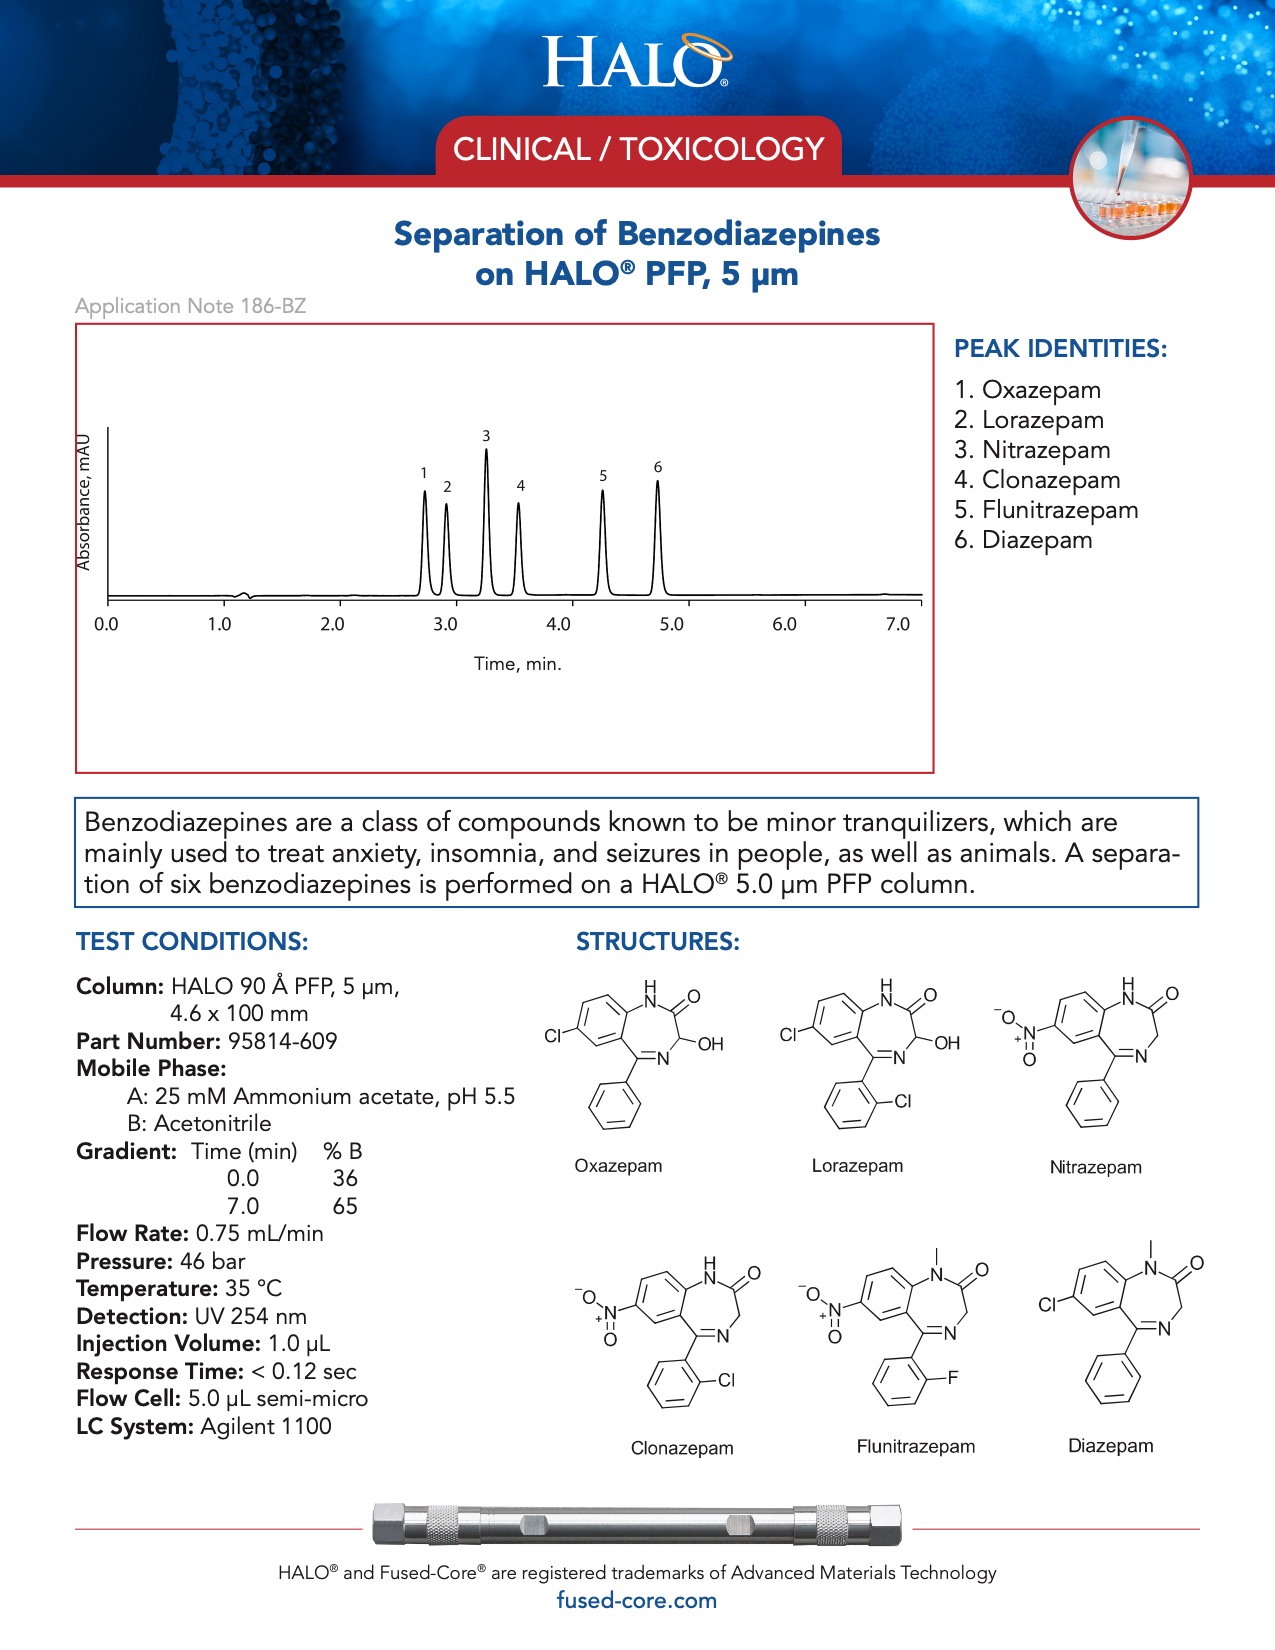 clinical toxicology testing - separation of benzodiazepines on pfp column